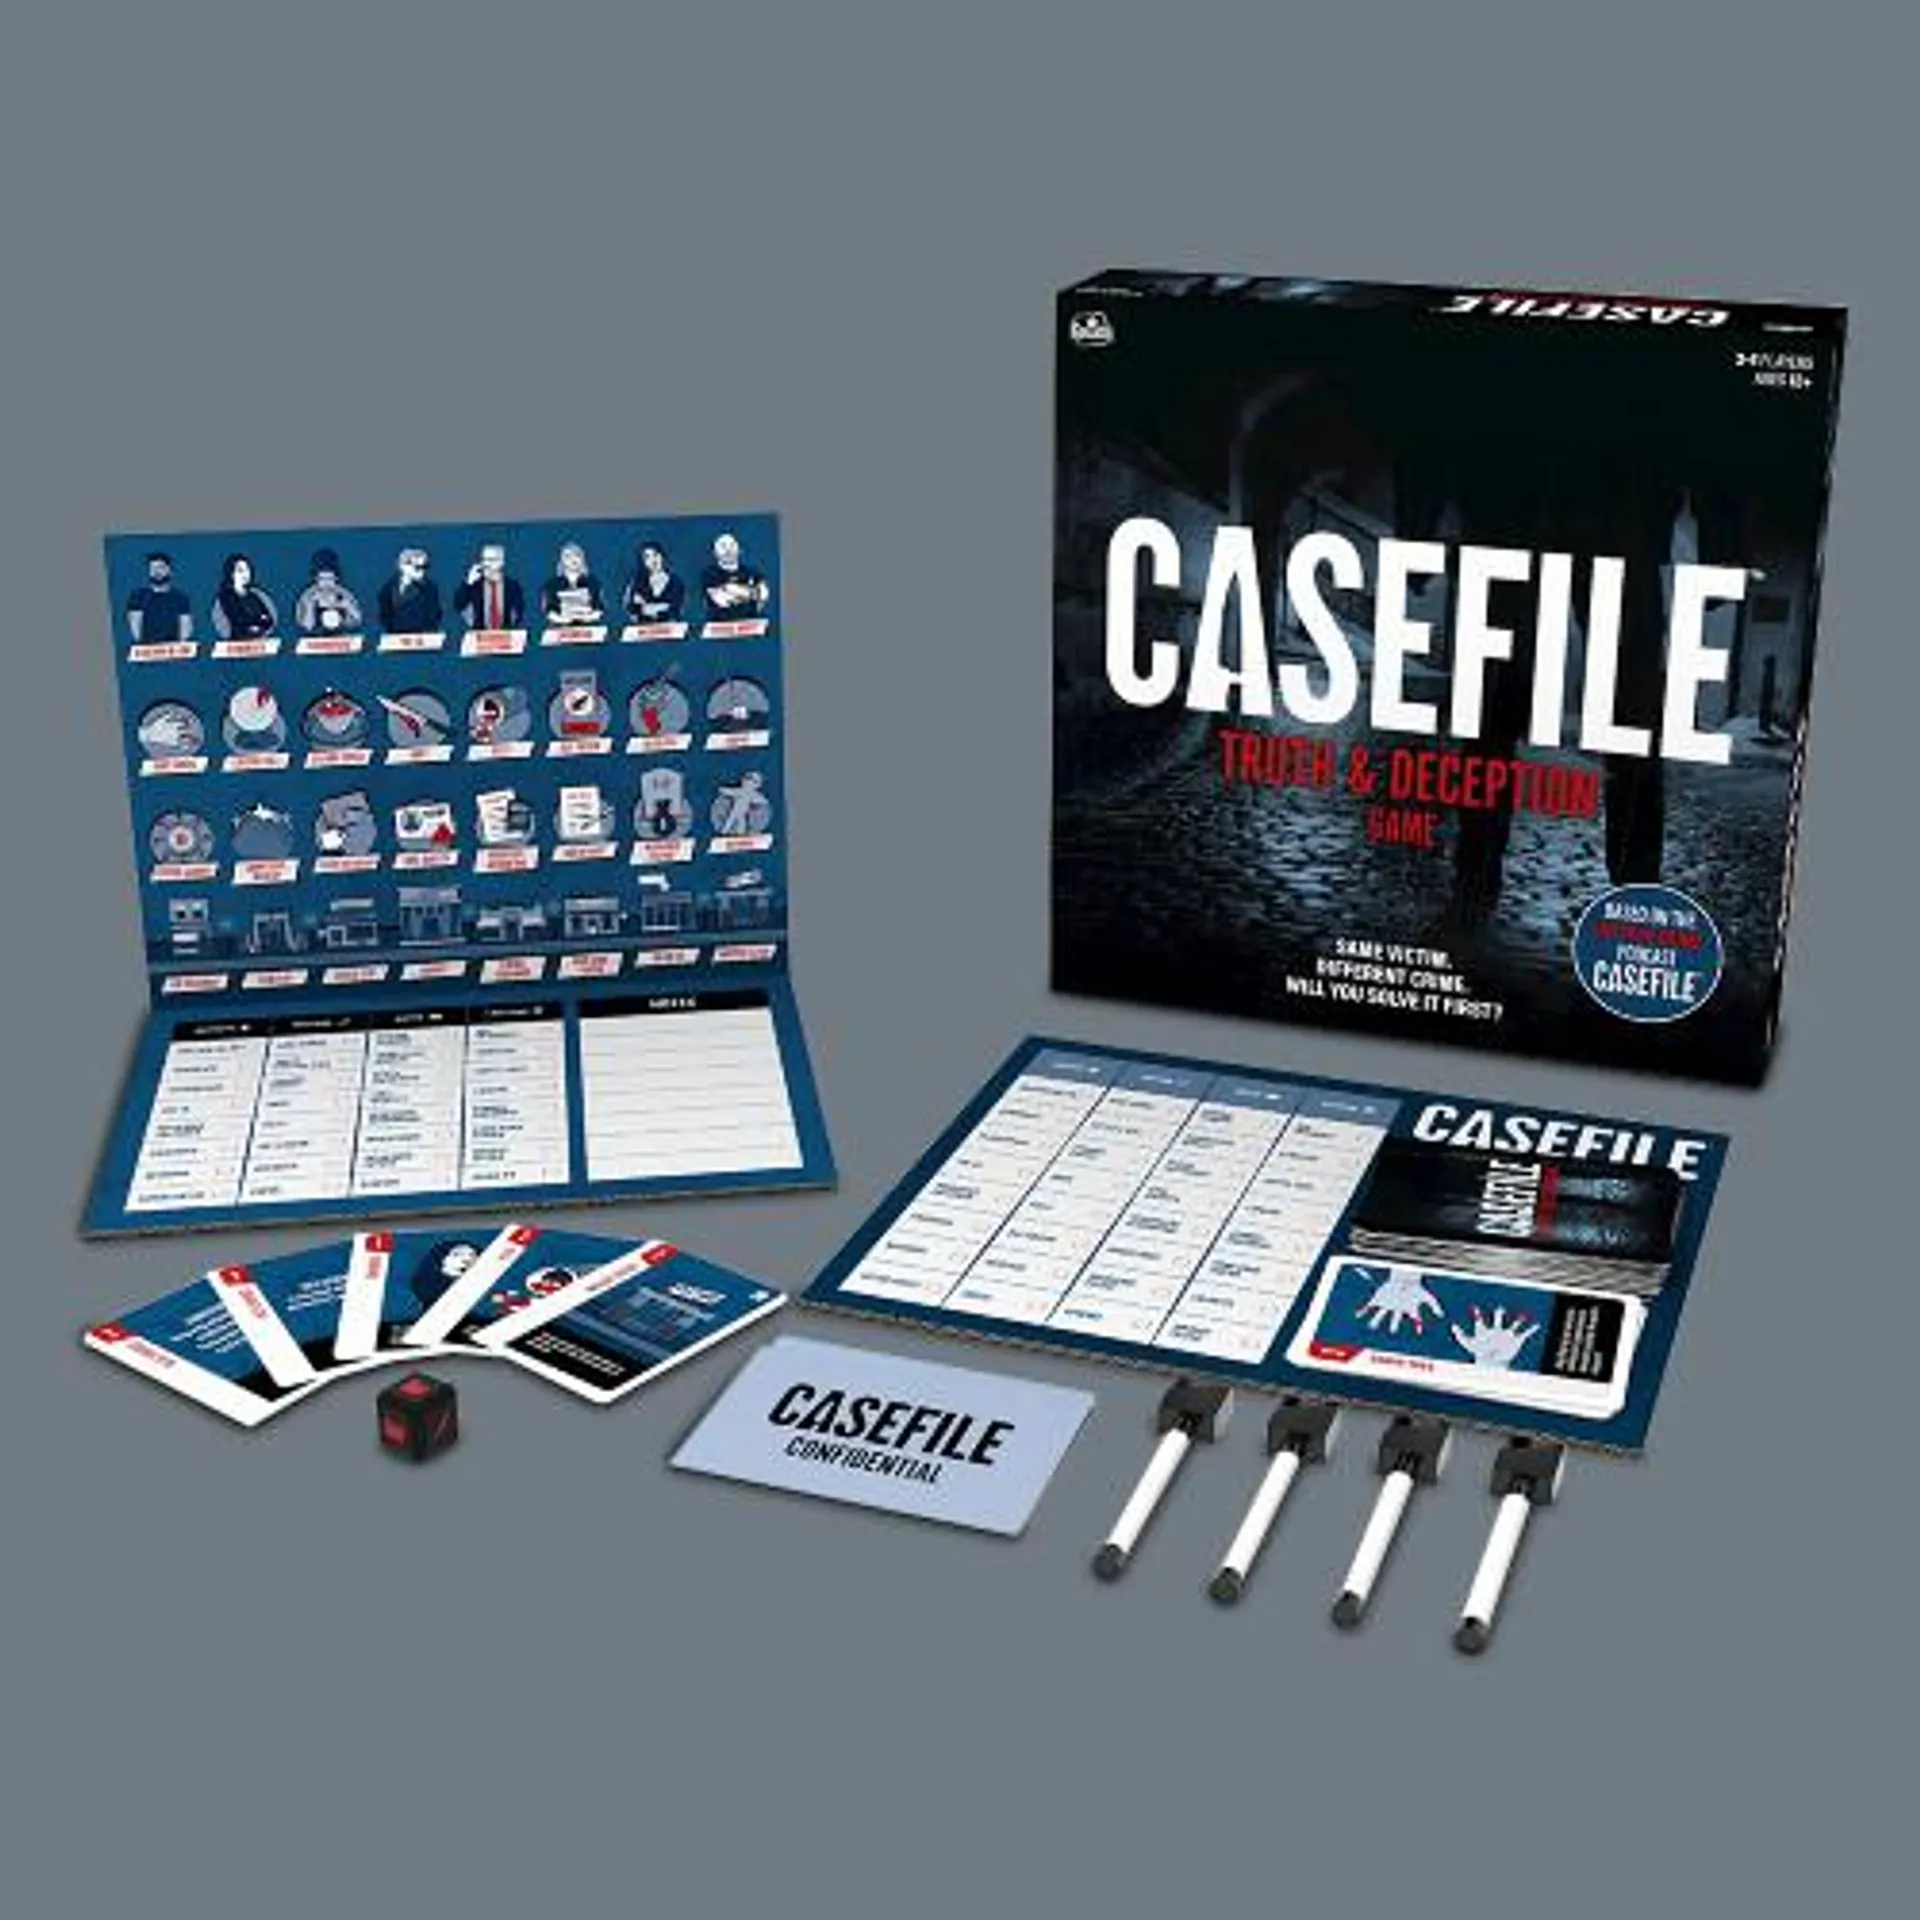 Casefile: The Truth & Deception Game